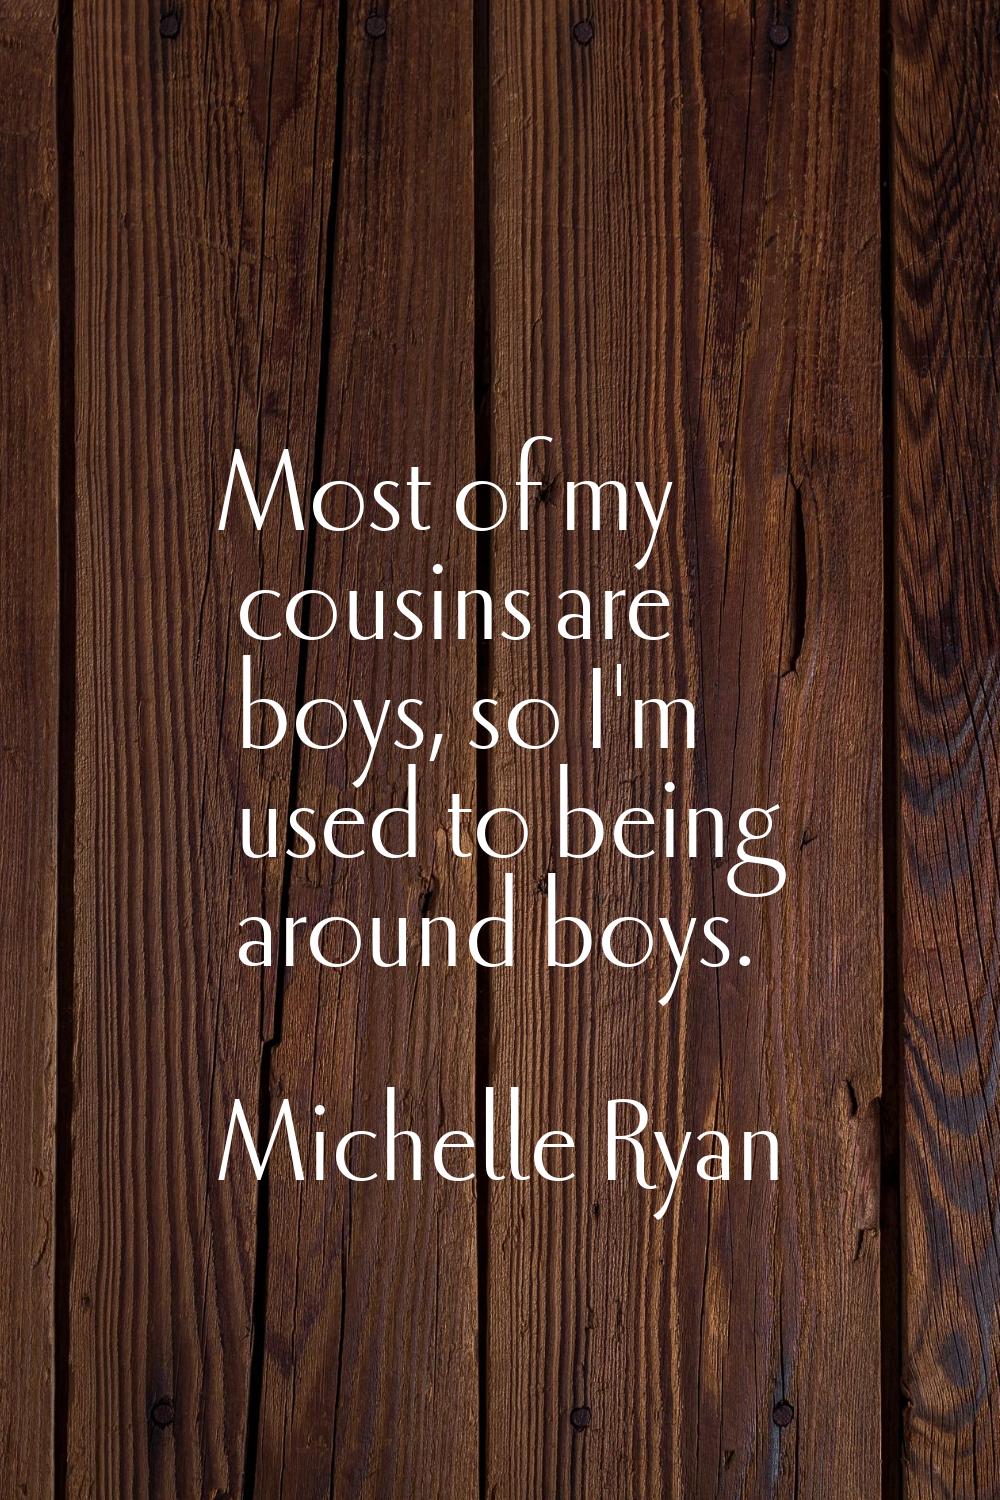 Most of my cousins are boys, so I'm used to being around boys.